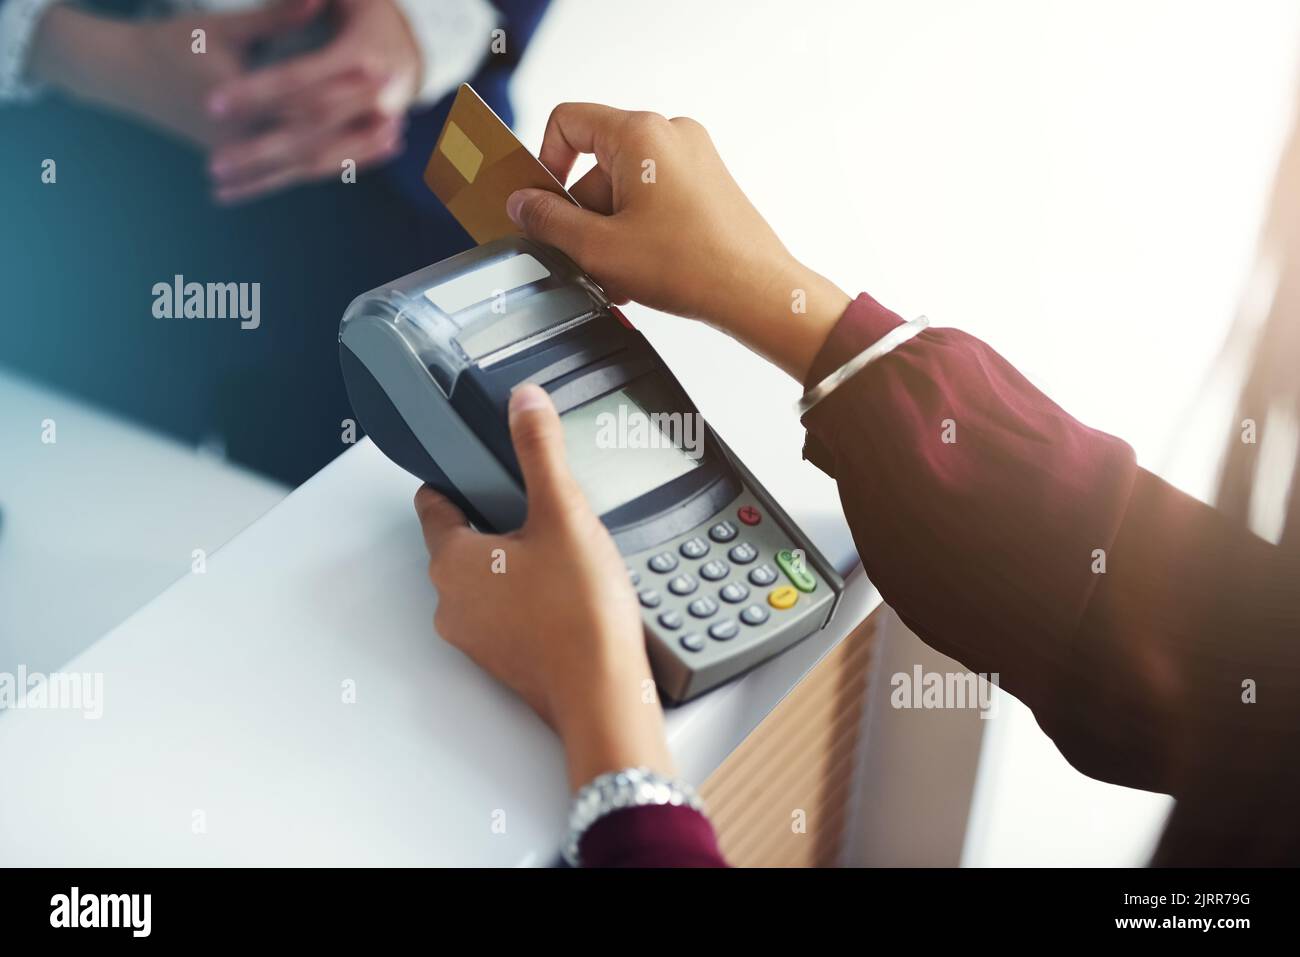 Settling a charge by card. an unrecognisable person swiping a credit card for payment. Stock Photo